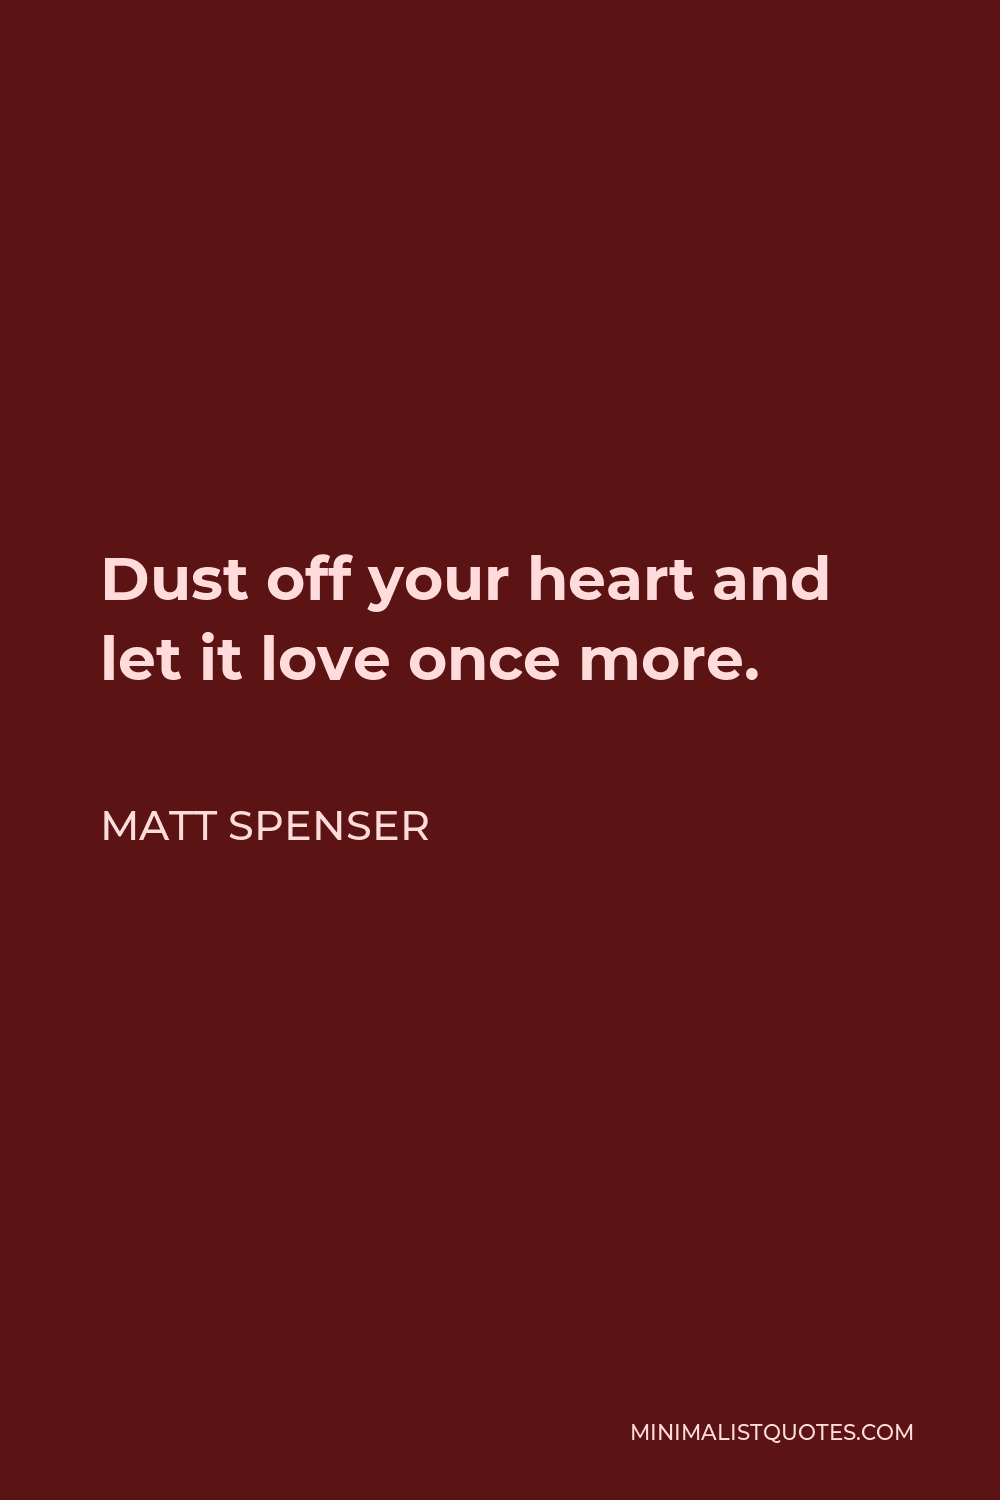 Matt Spenser Quote - Dust off your heart and let it love once more.